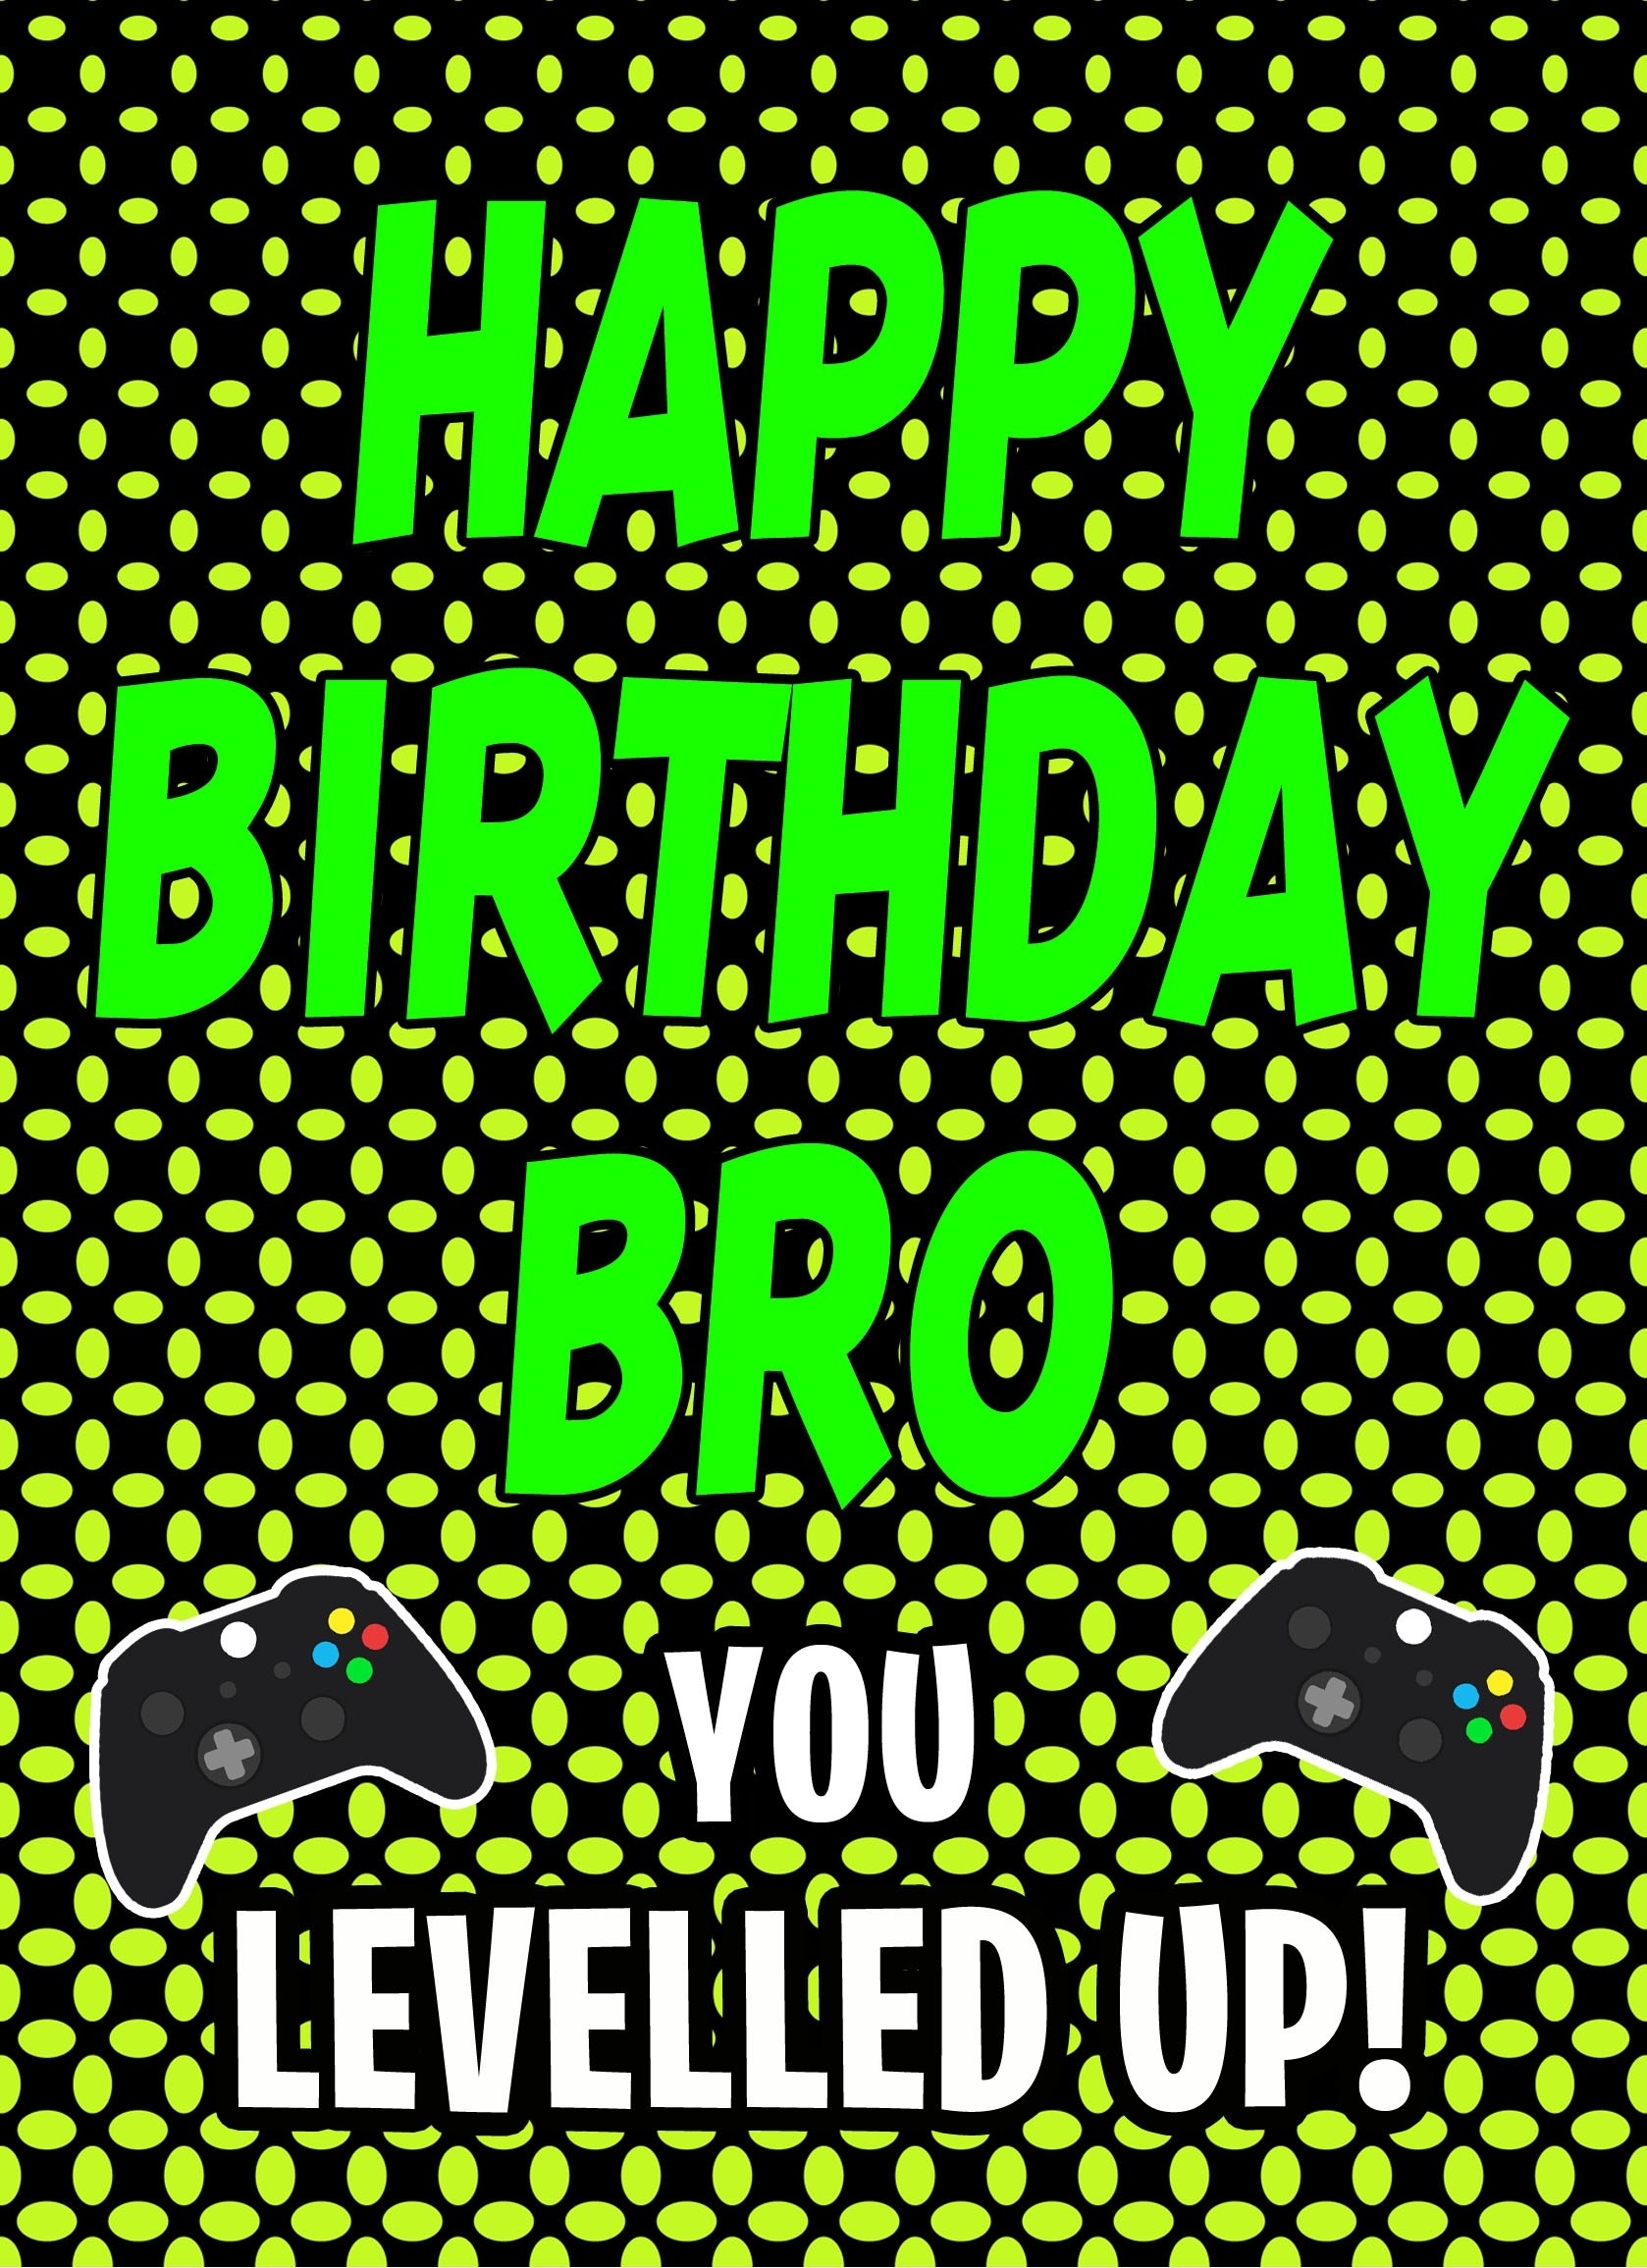 Gamer Birthday Card For Bro (Levelled Up)